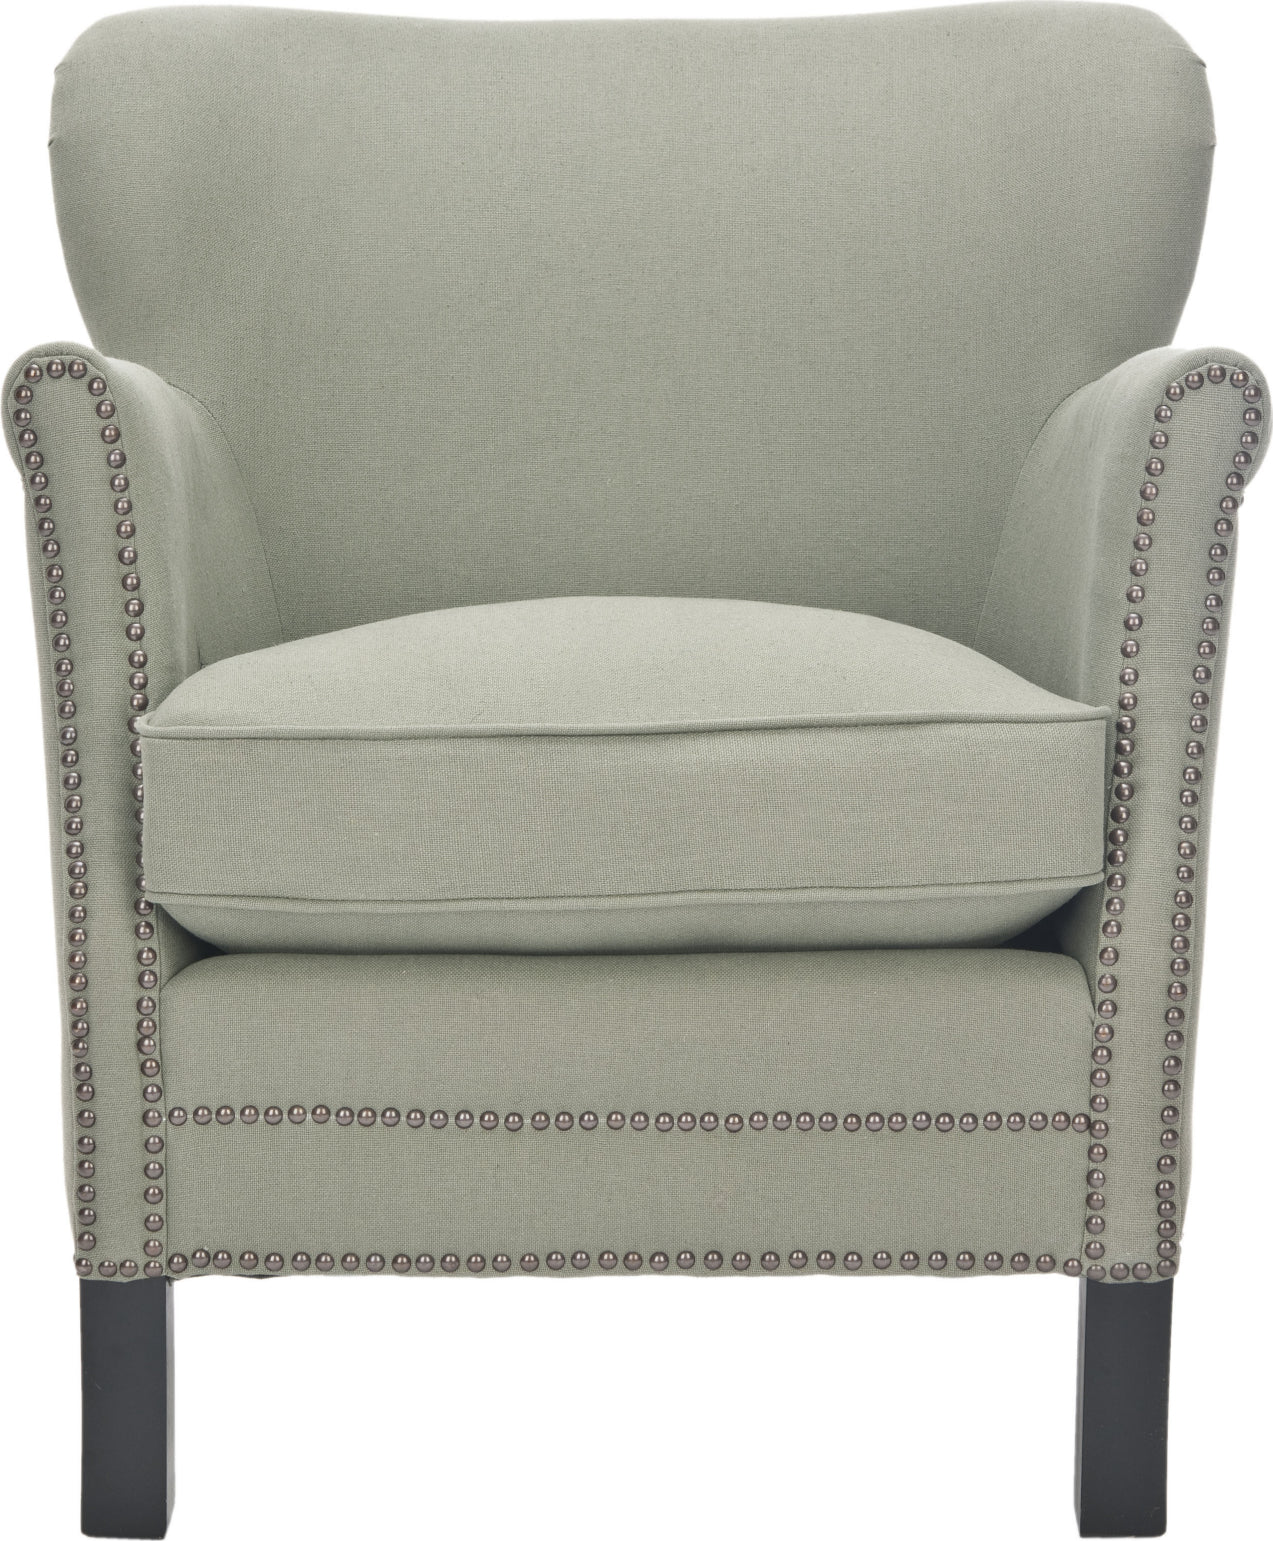 Safavieh Jenny Arm Chair With Bass Nail Heads Sea Mist and Black Furniture main image